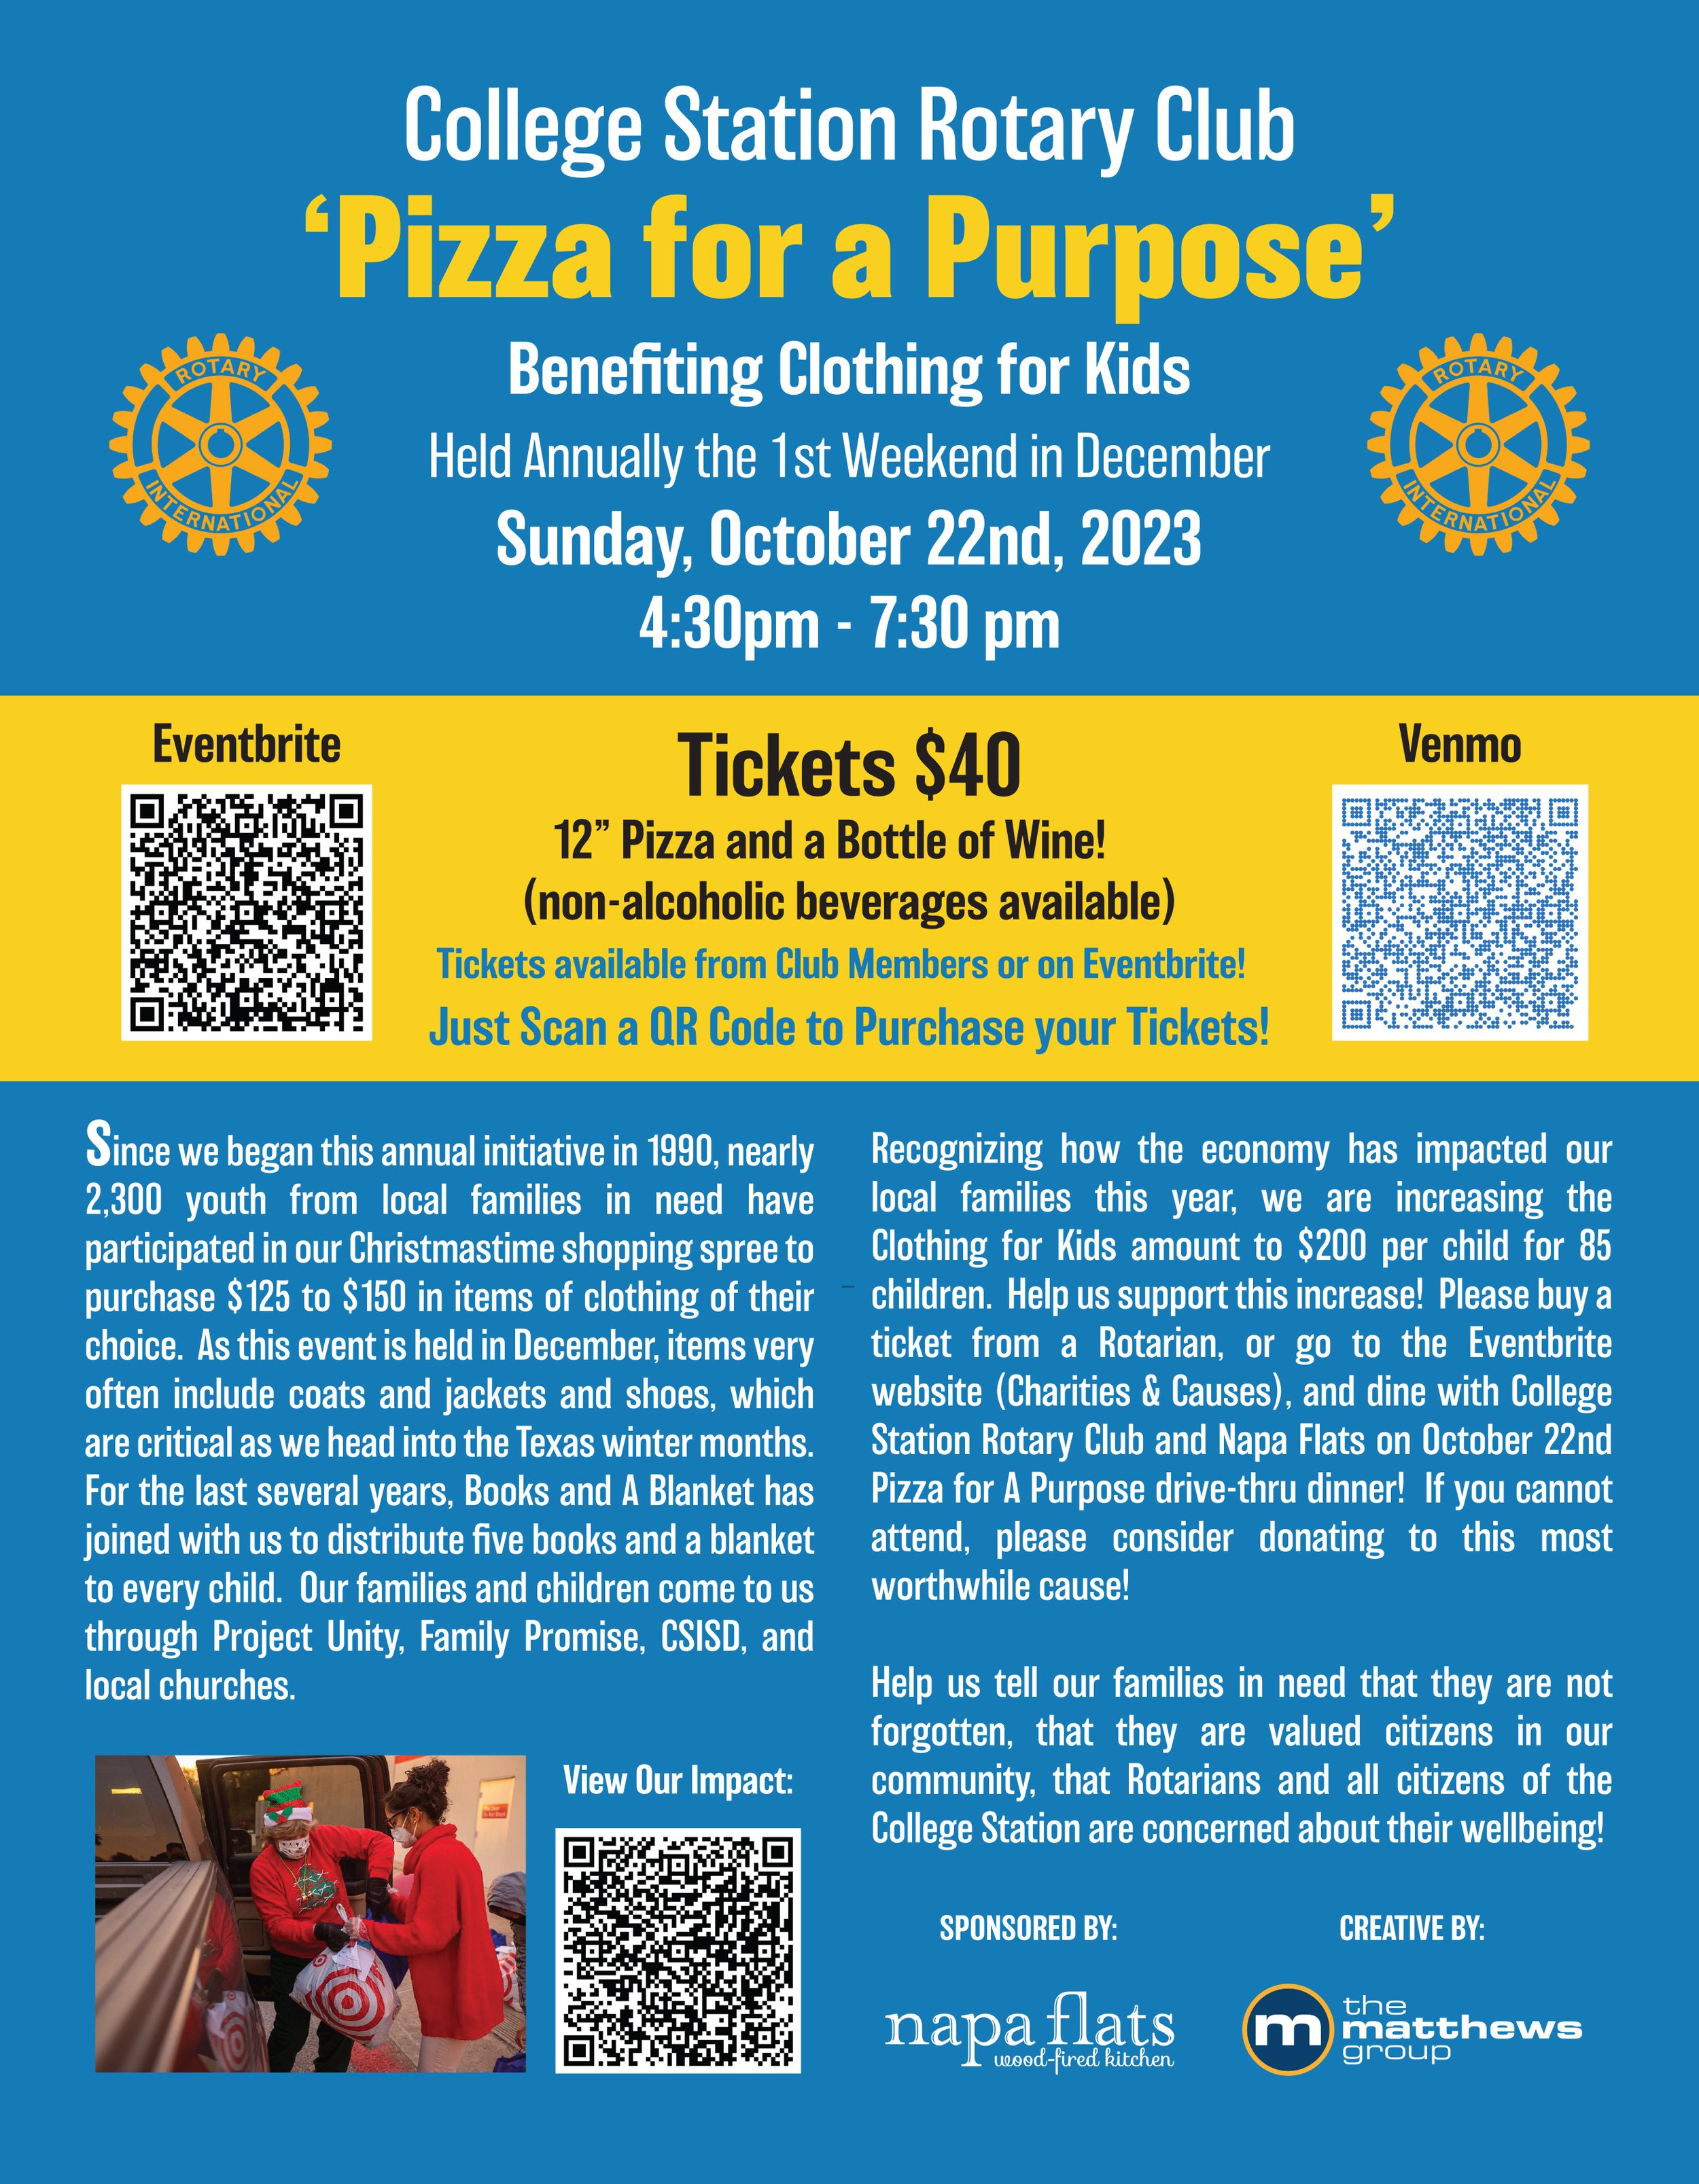 30852 CLL Rotary Club - 'Pizza for a Purpose' 8.5X11 Poster FINAL.jpg